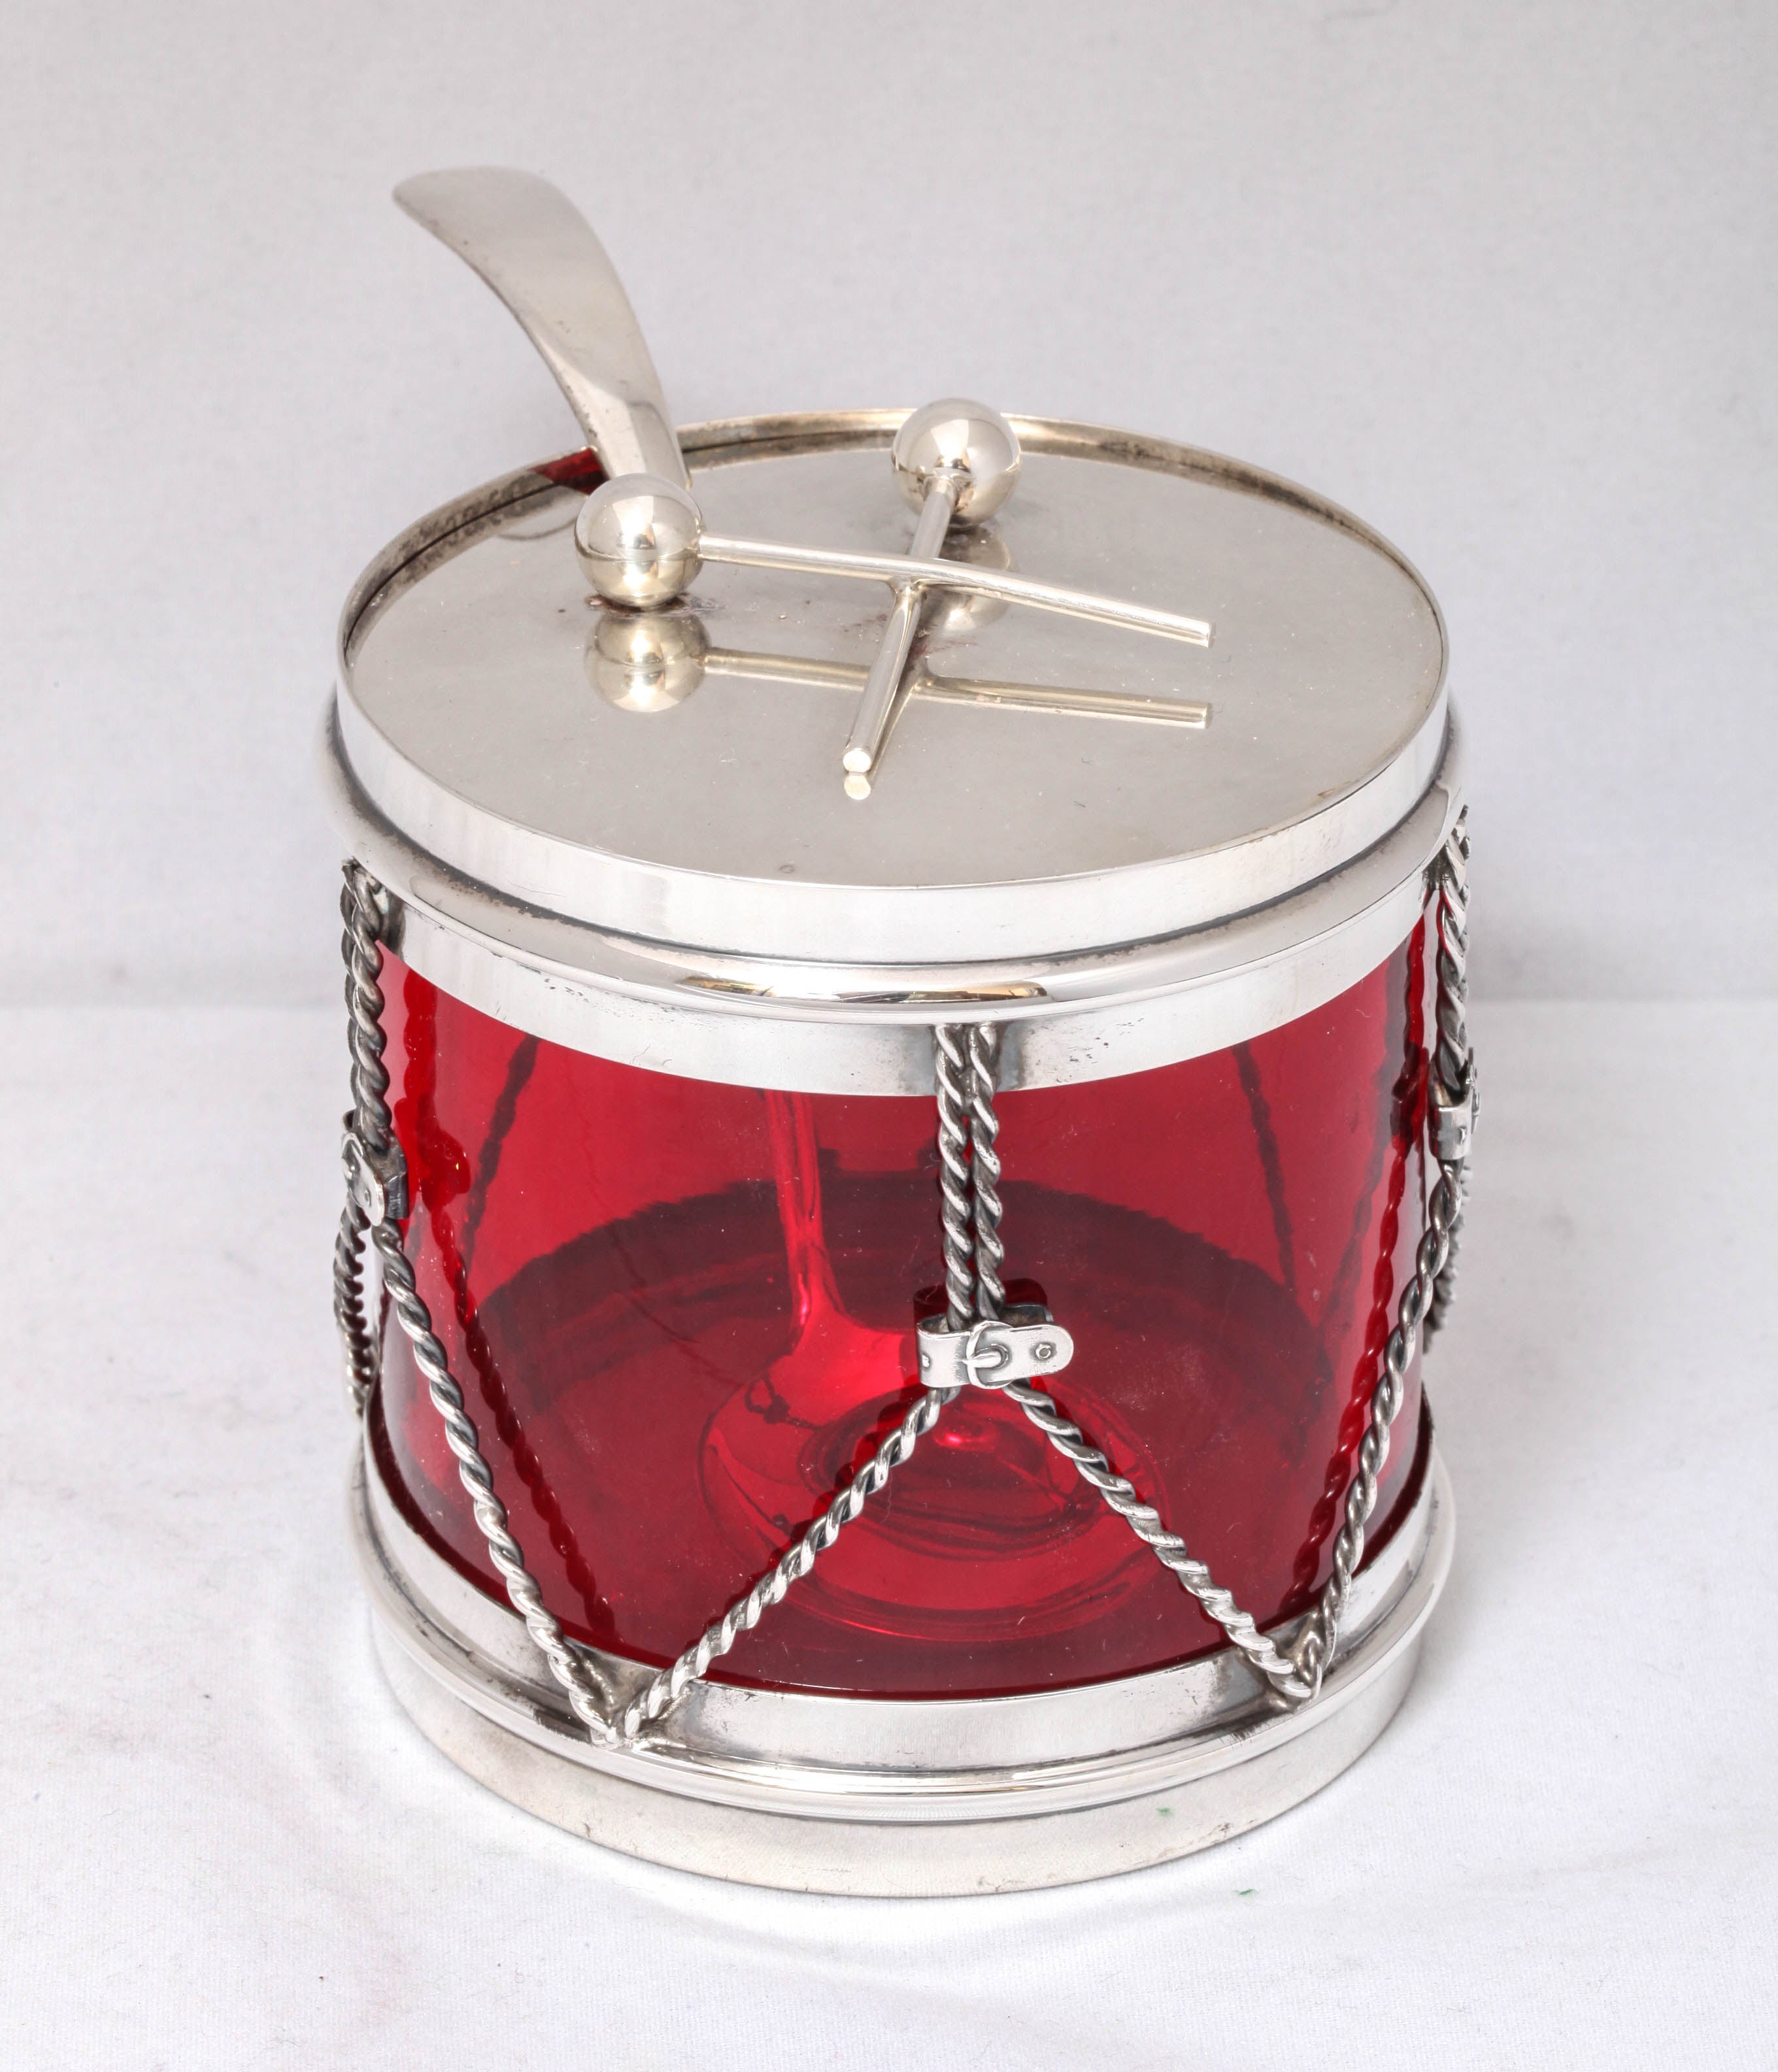 Art Deco, sterling silver-mounted ruby glass, drum-form, condiments jar with matching sterling silver spoon, R. Blackinton & Co., No. Attleboro, Mass., circa 1930s. Lid has two drumsticks which are used as the handle. Measures: 3 1/4 inches high x 3